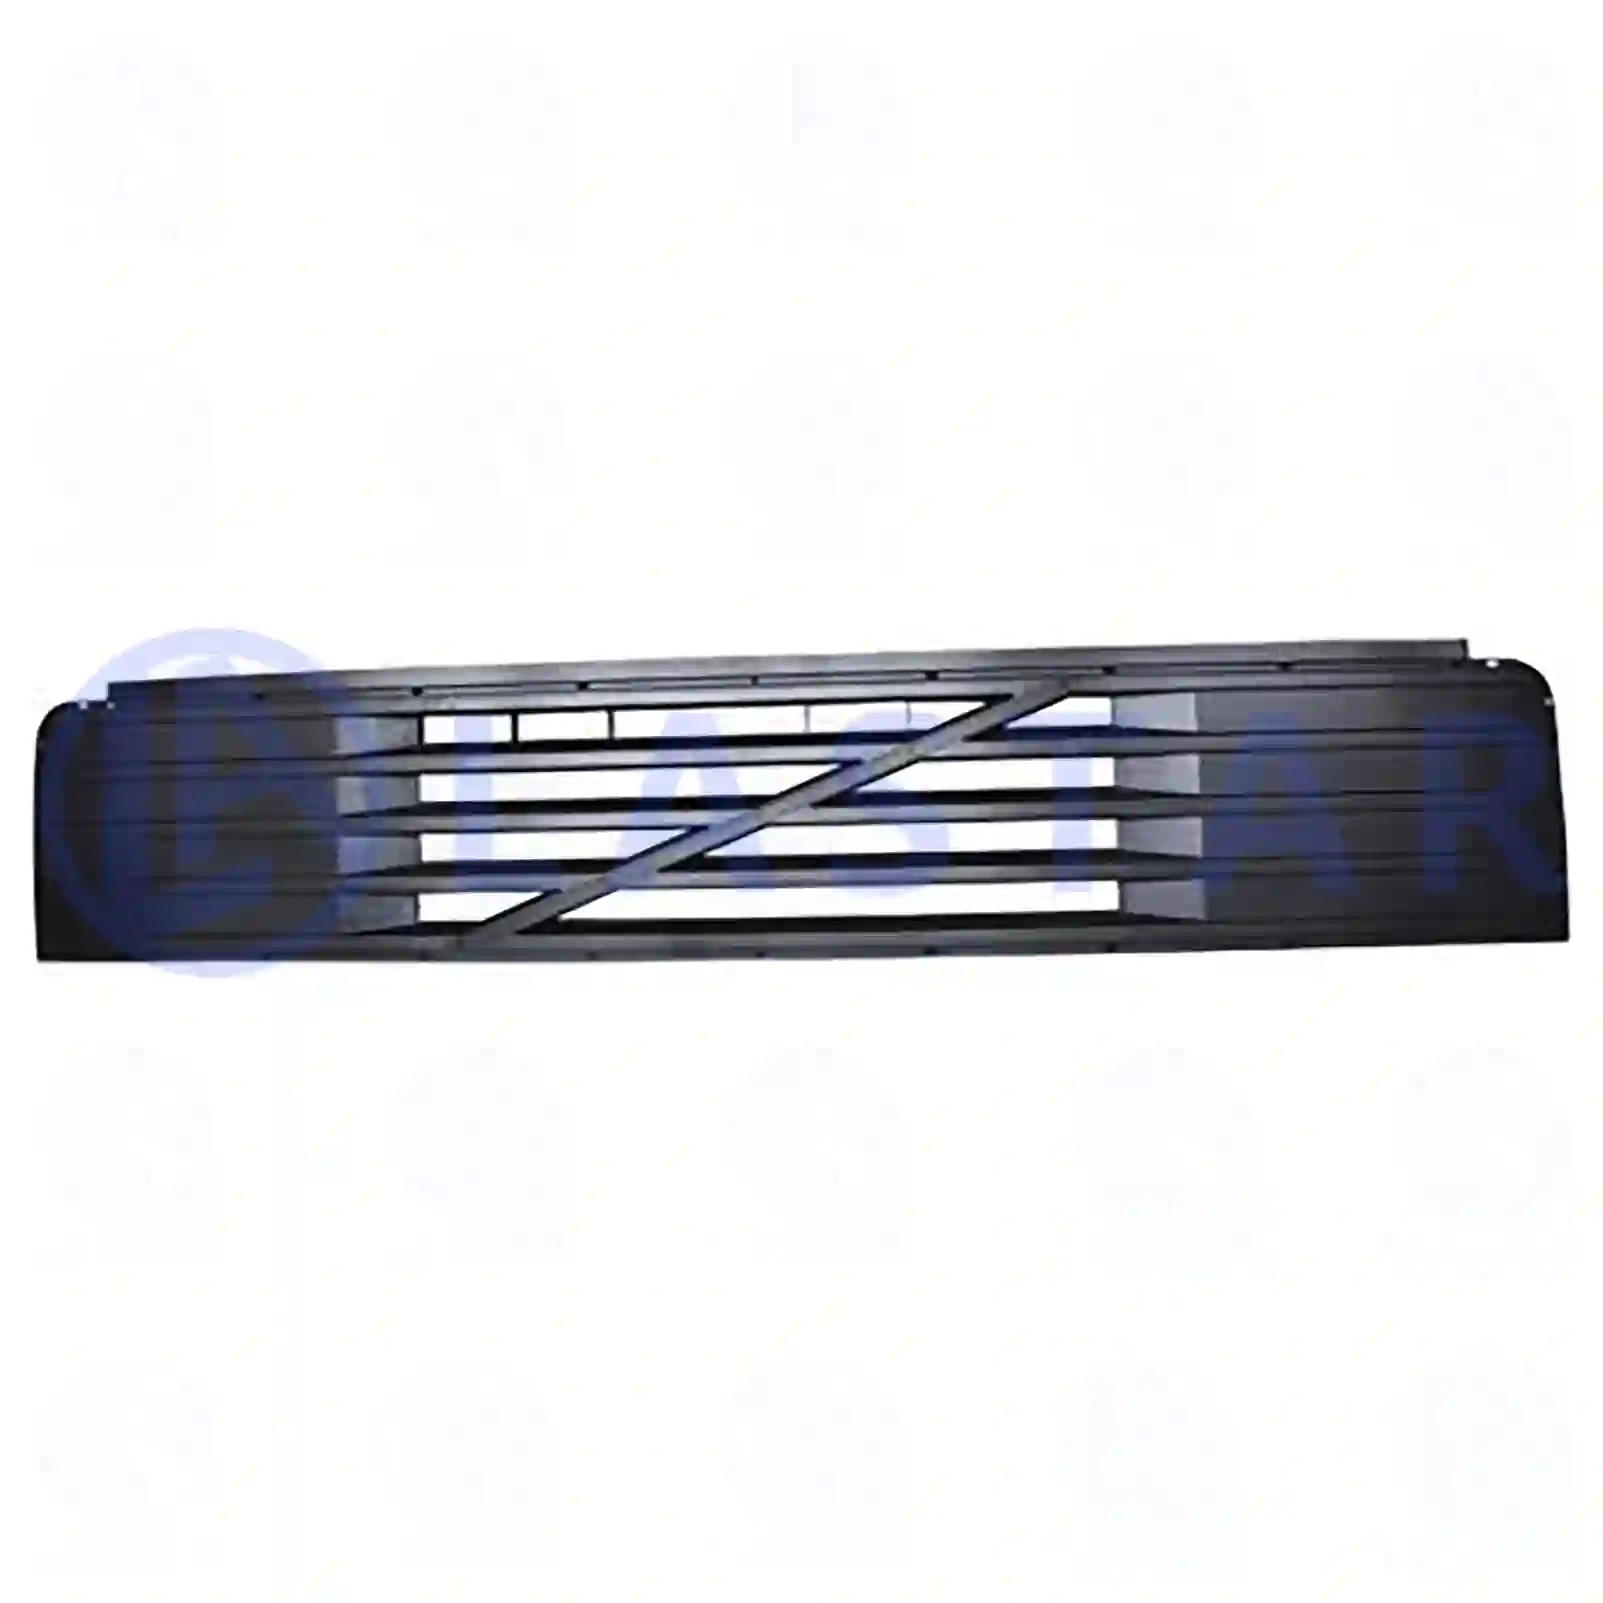 Front grill, upper, 77721046, 20360507, 8144455 ||  77721046 Lastar Spare Part | Truck Spare Parts, Auotomotive Spare Parts Front grill, upper, 77721046, 20360507, 8144455 ||  77721046 Lastar Spare Part | Truck Spare Parts, Auotomotive Spare Parts